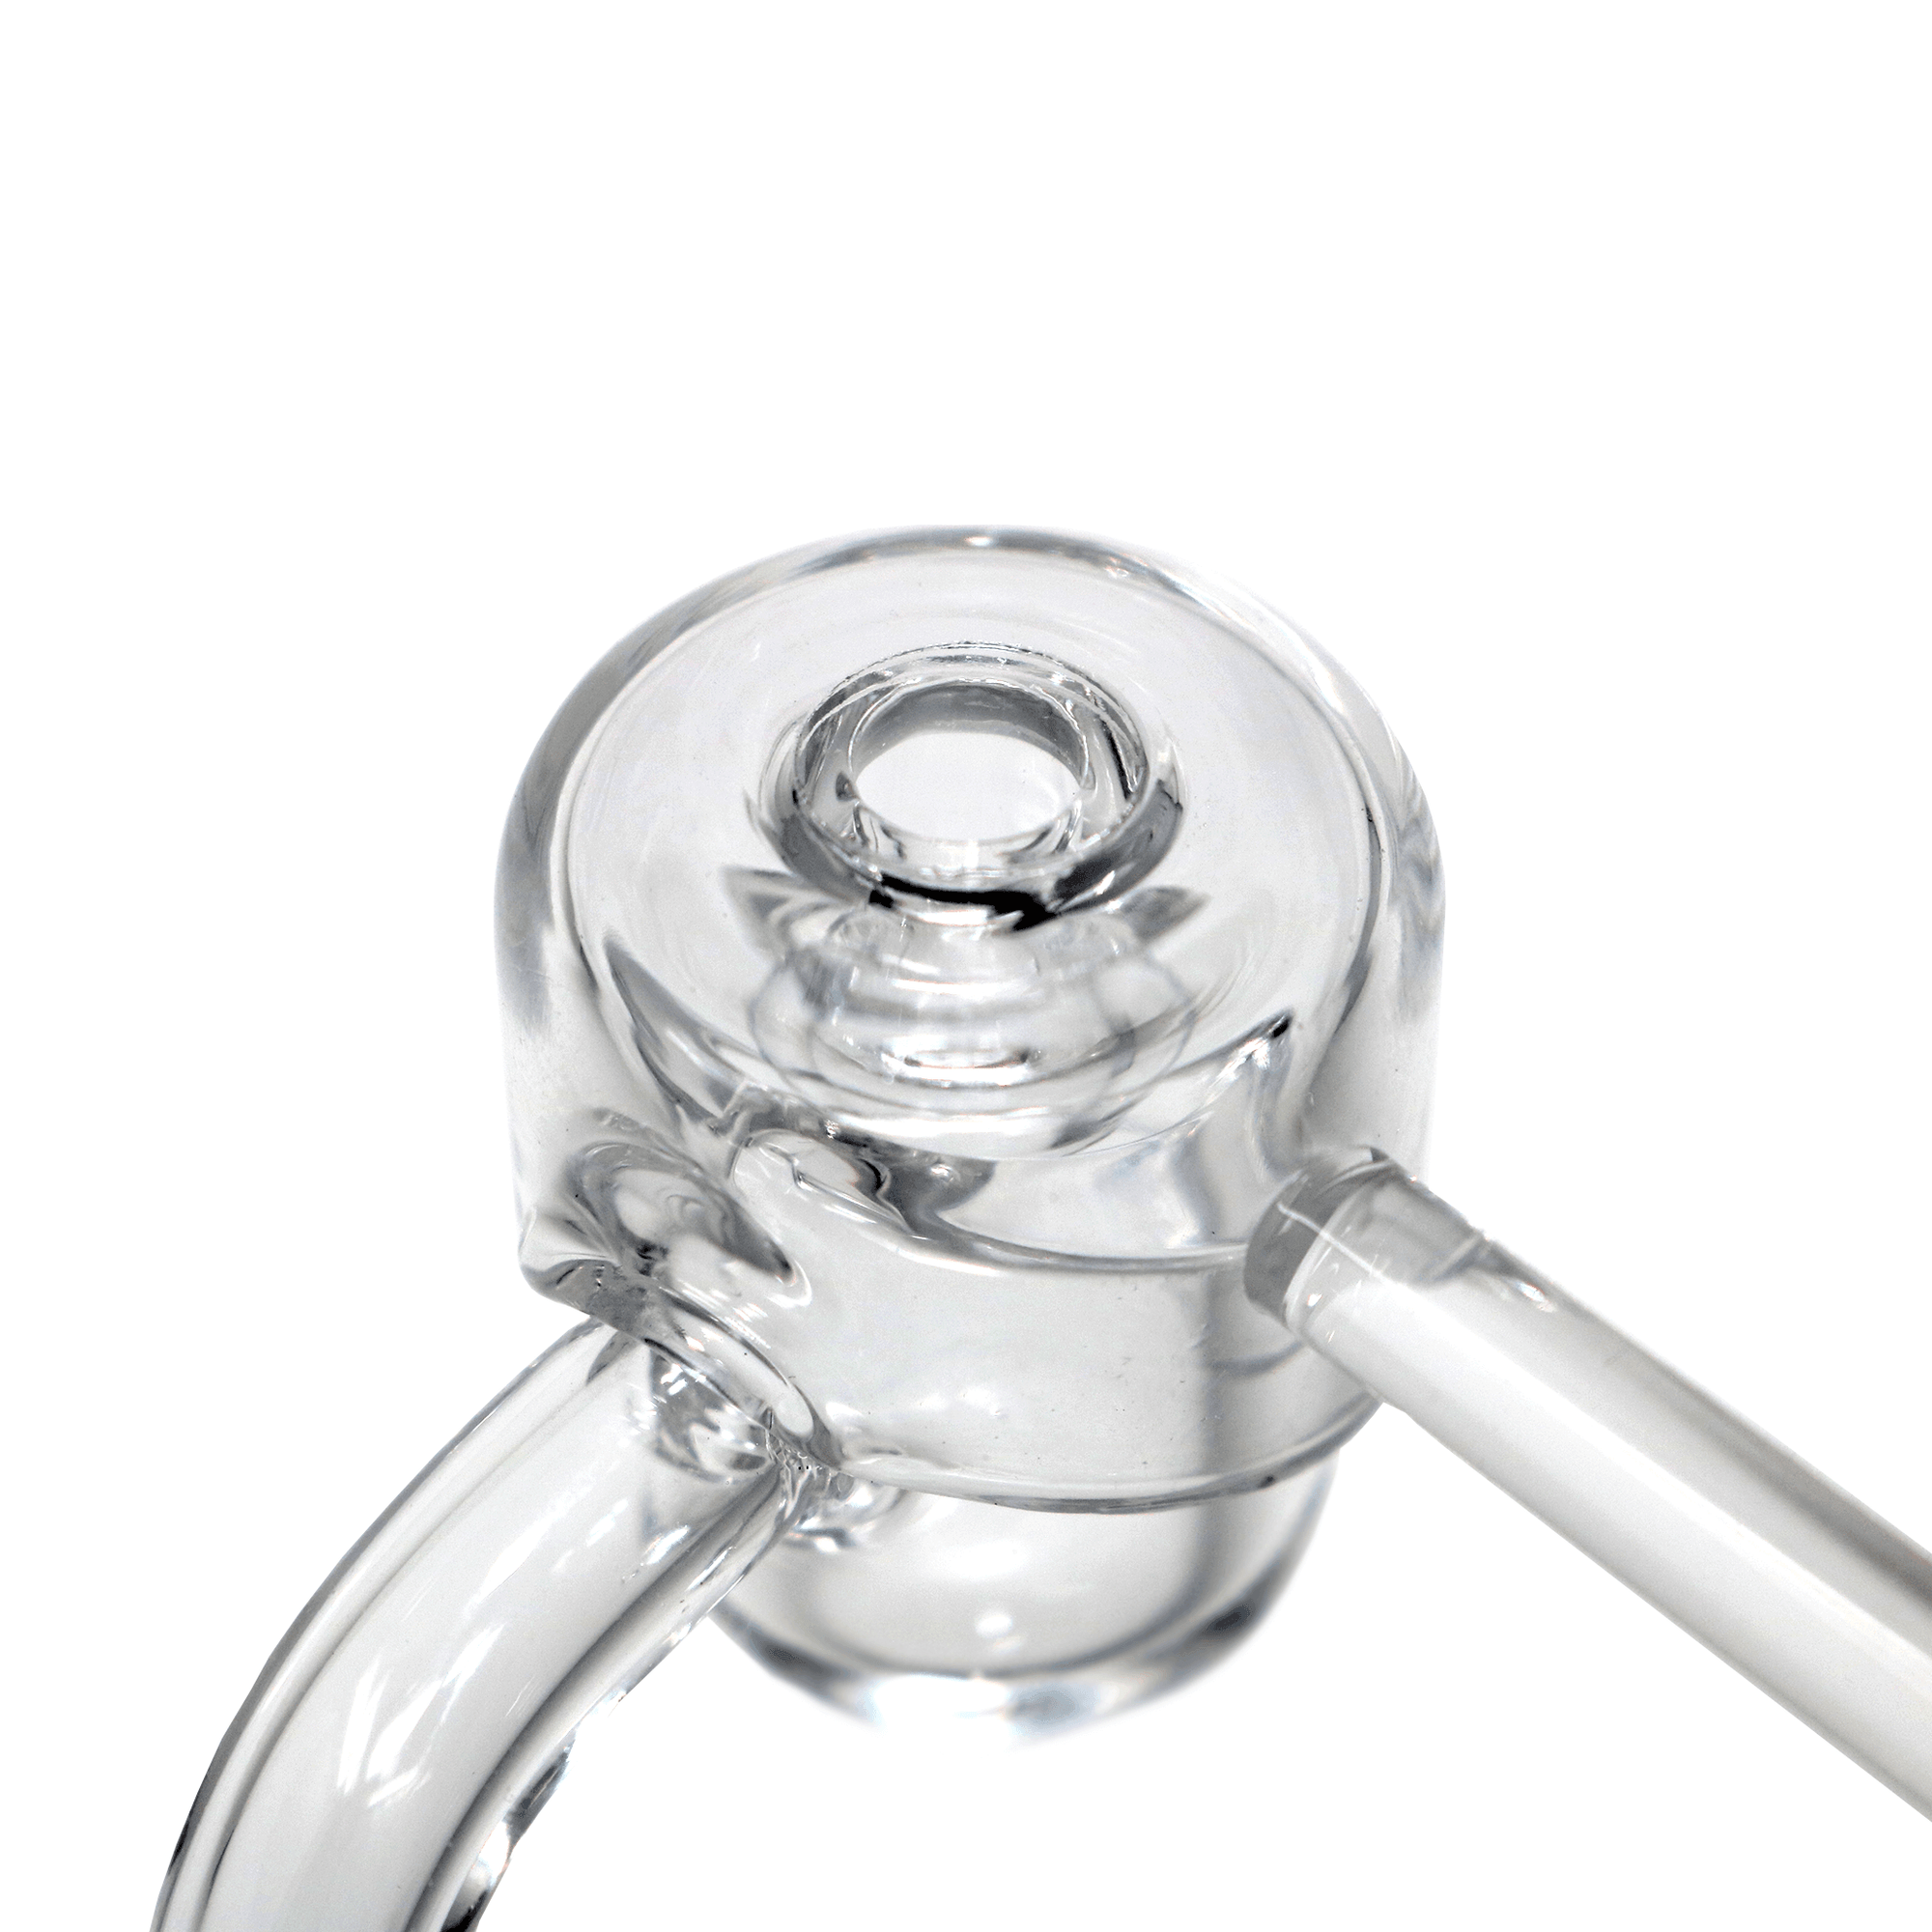 Carb Cap - Banger Cap with Dabber | Close Up In Use Capped Banger | the dabbing specialists